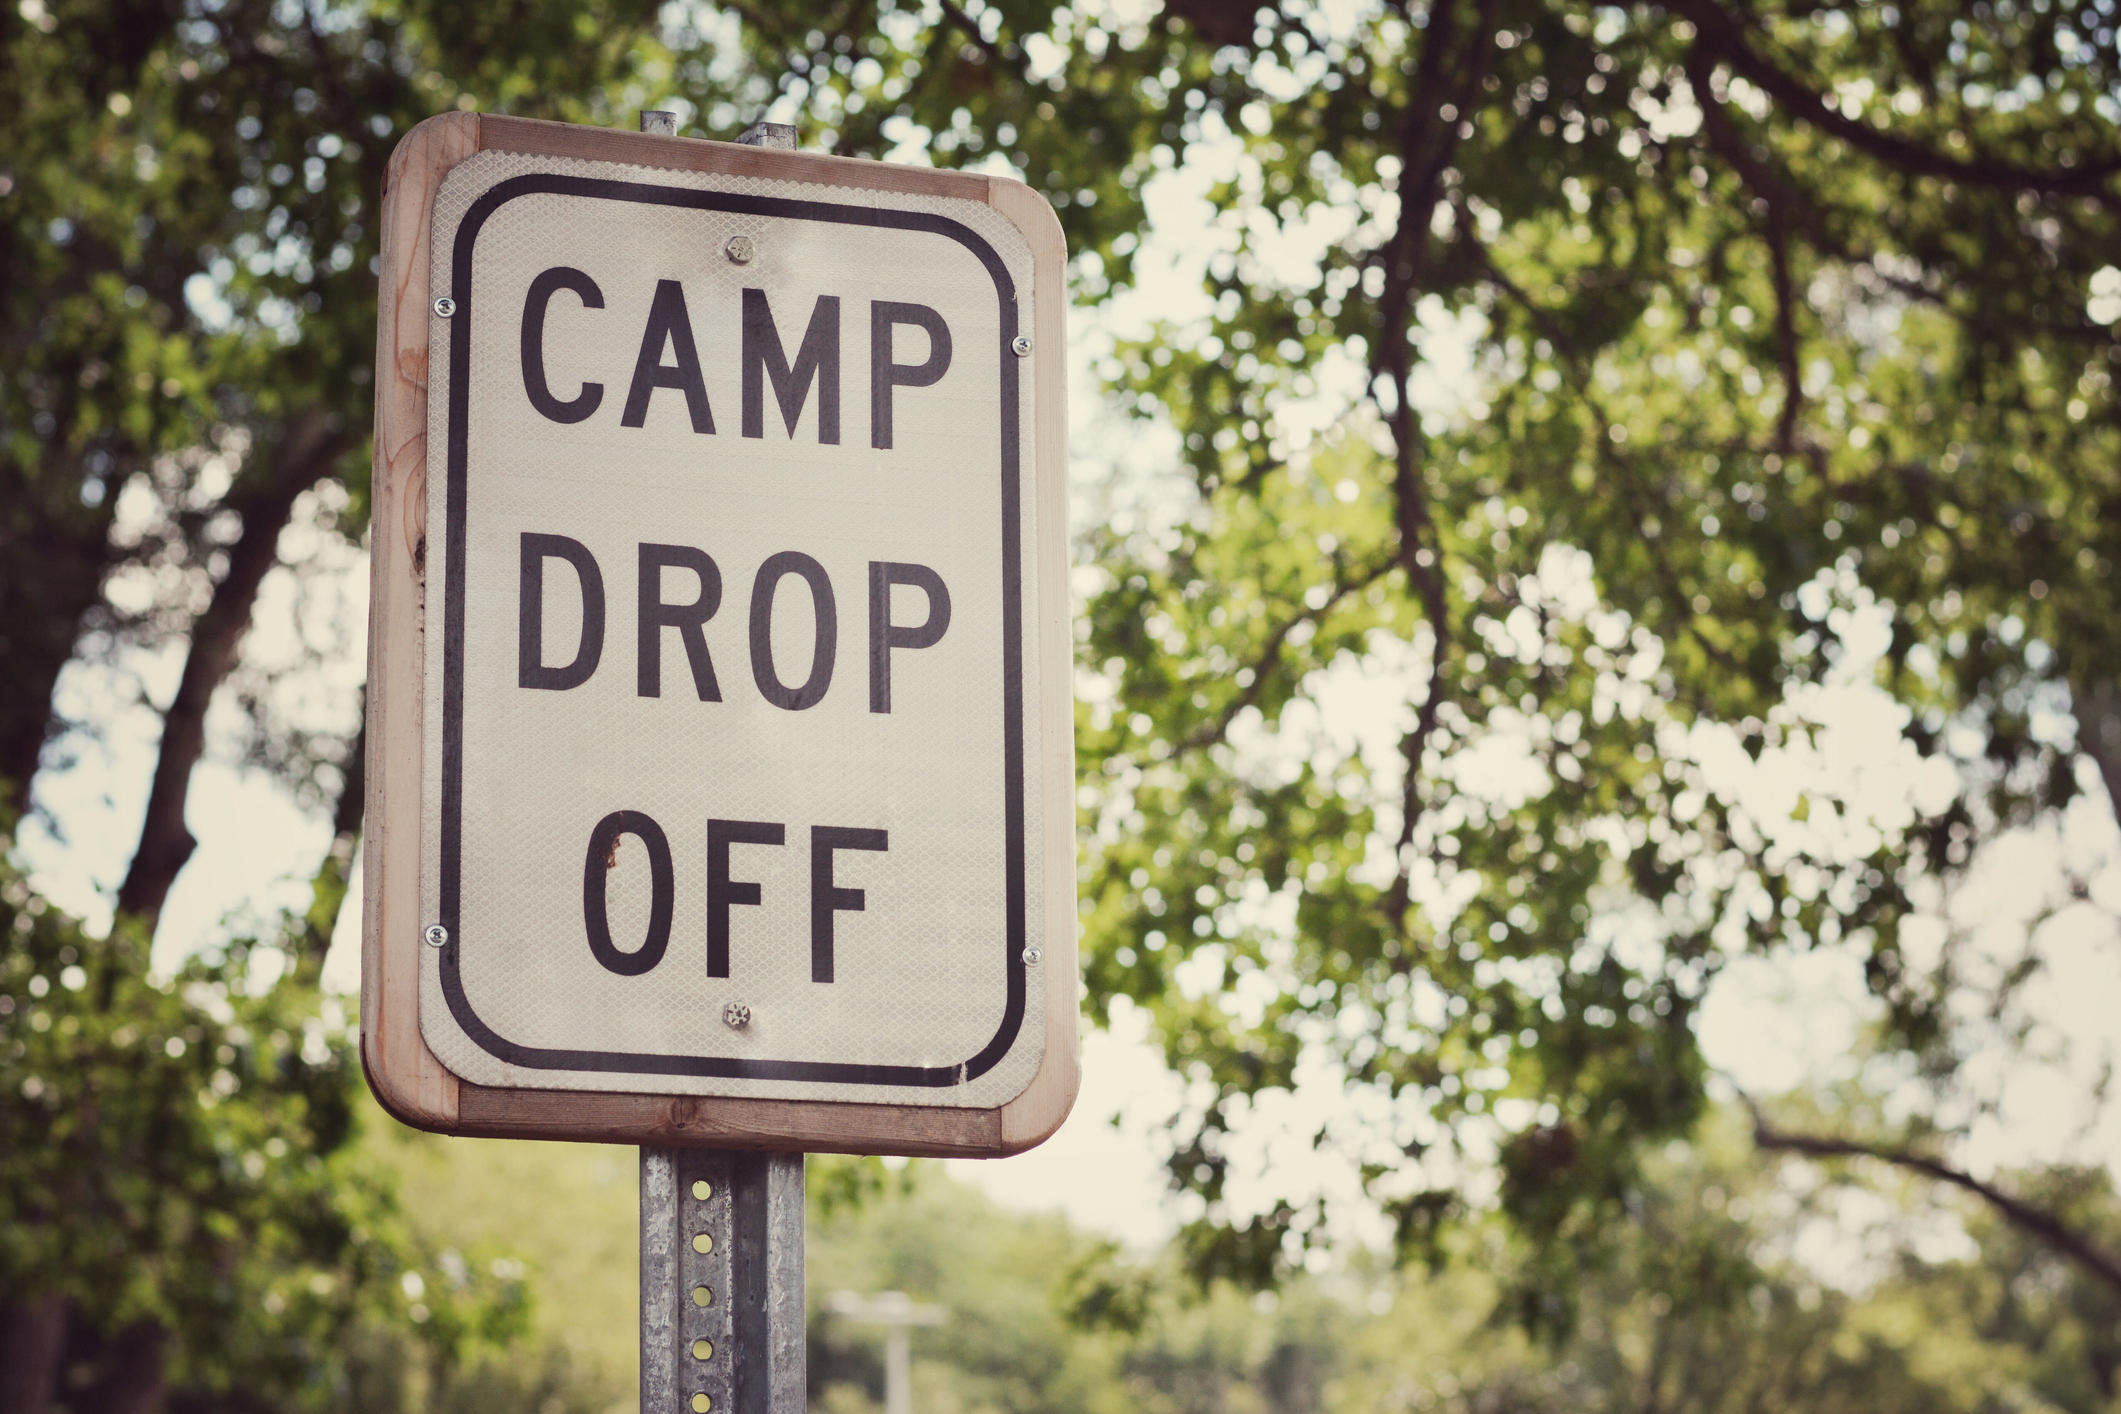 Outdoor image with a Camp Drop Off sign